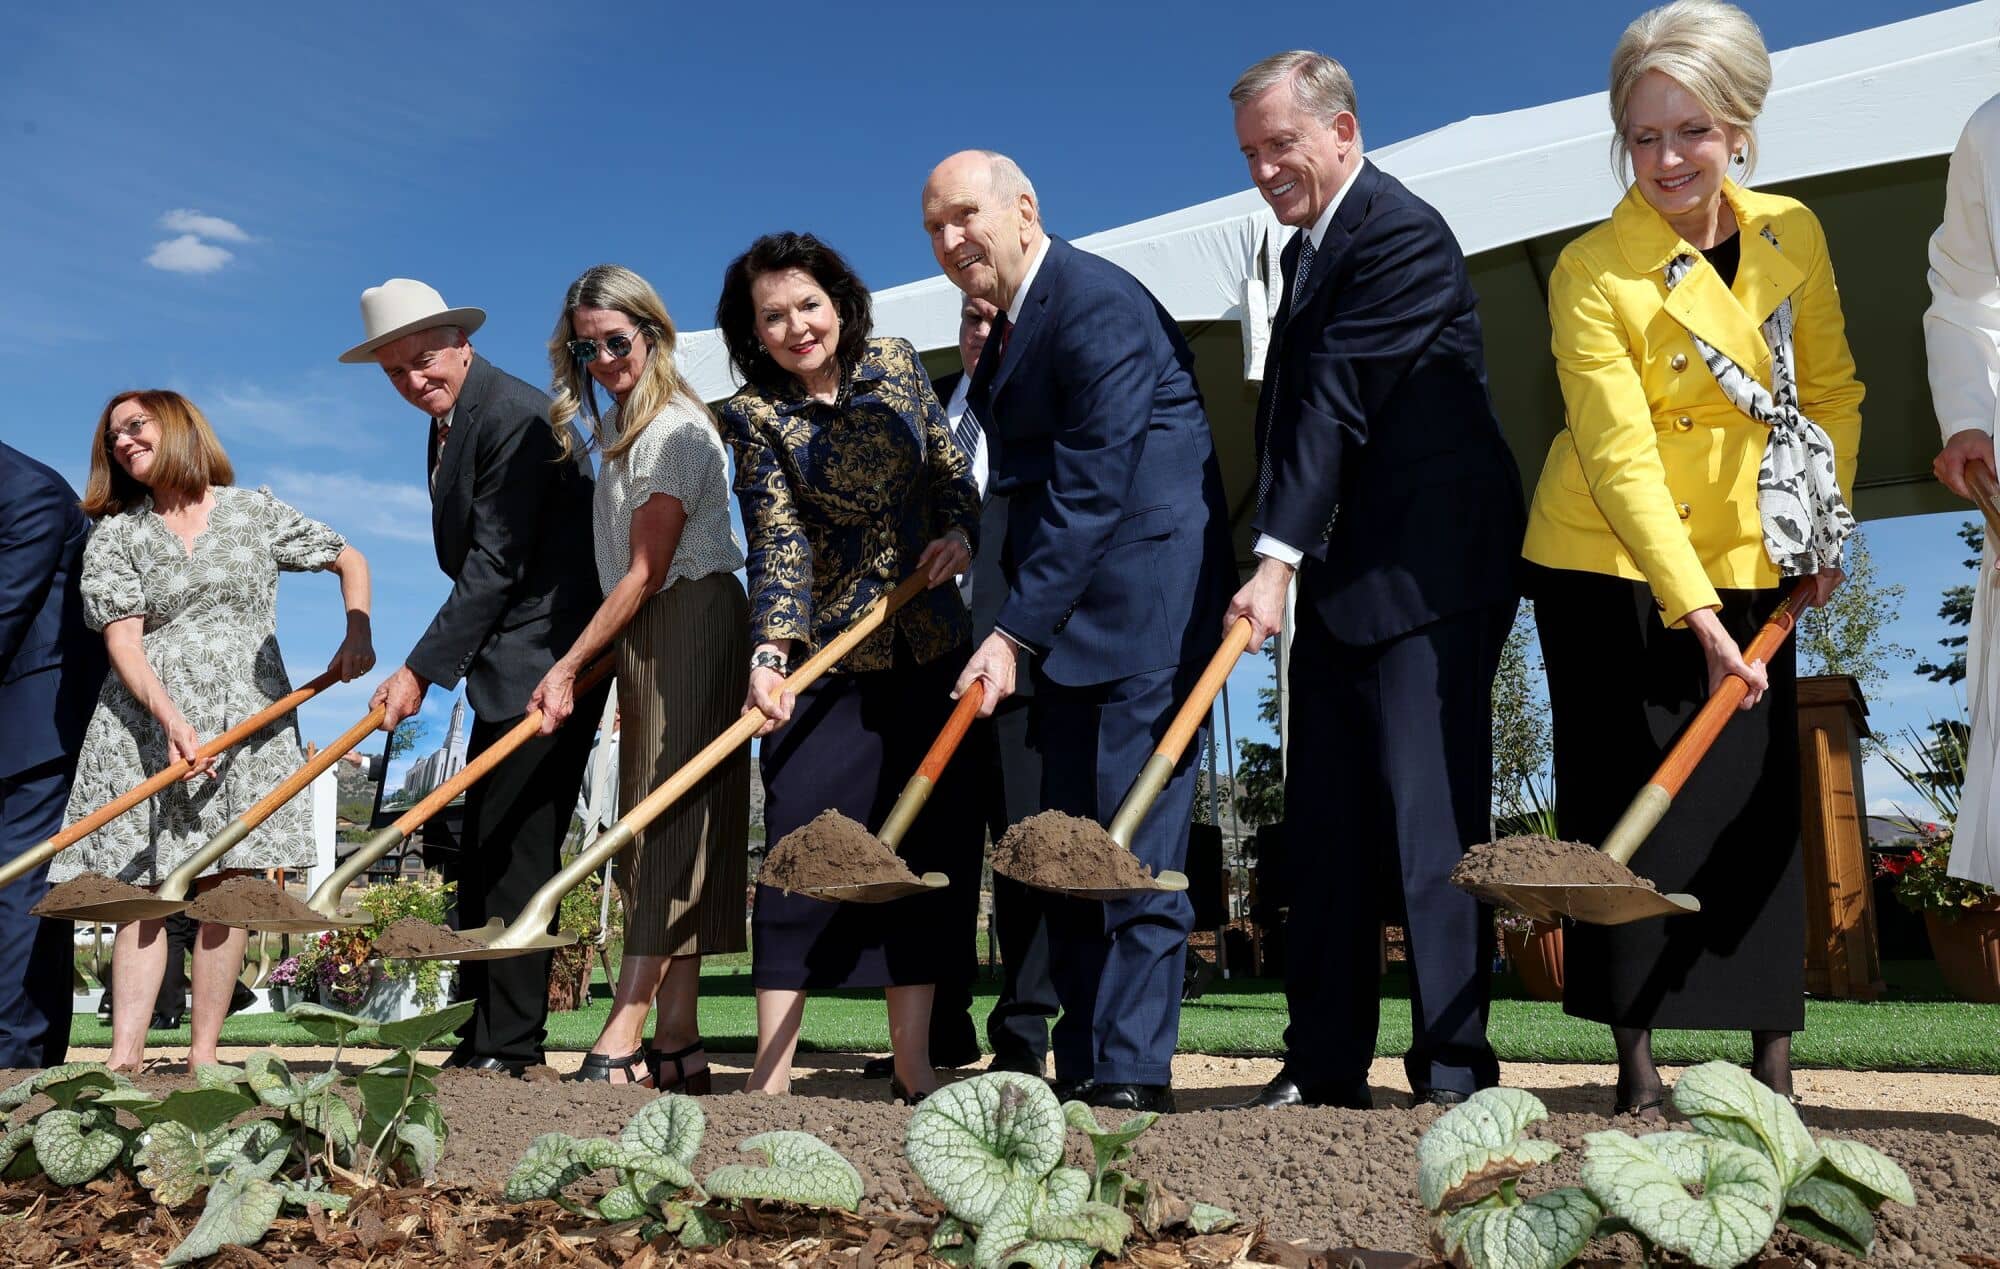 President Russell M. Nelson and others holding shovels into the ground.